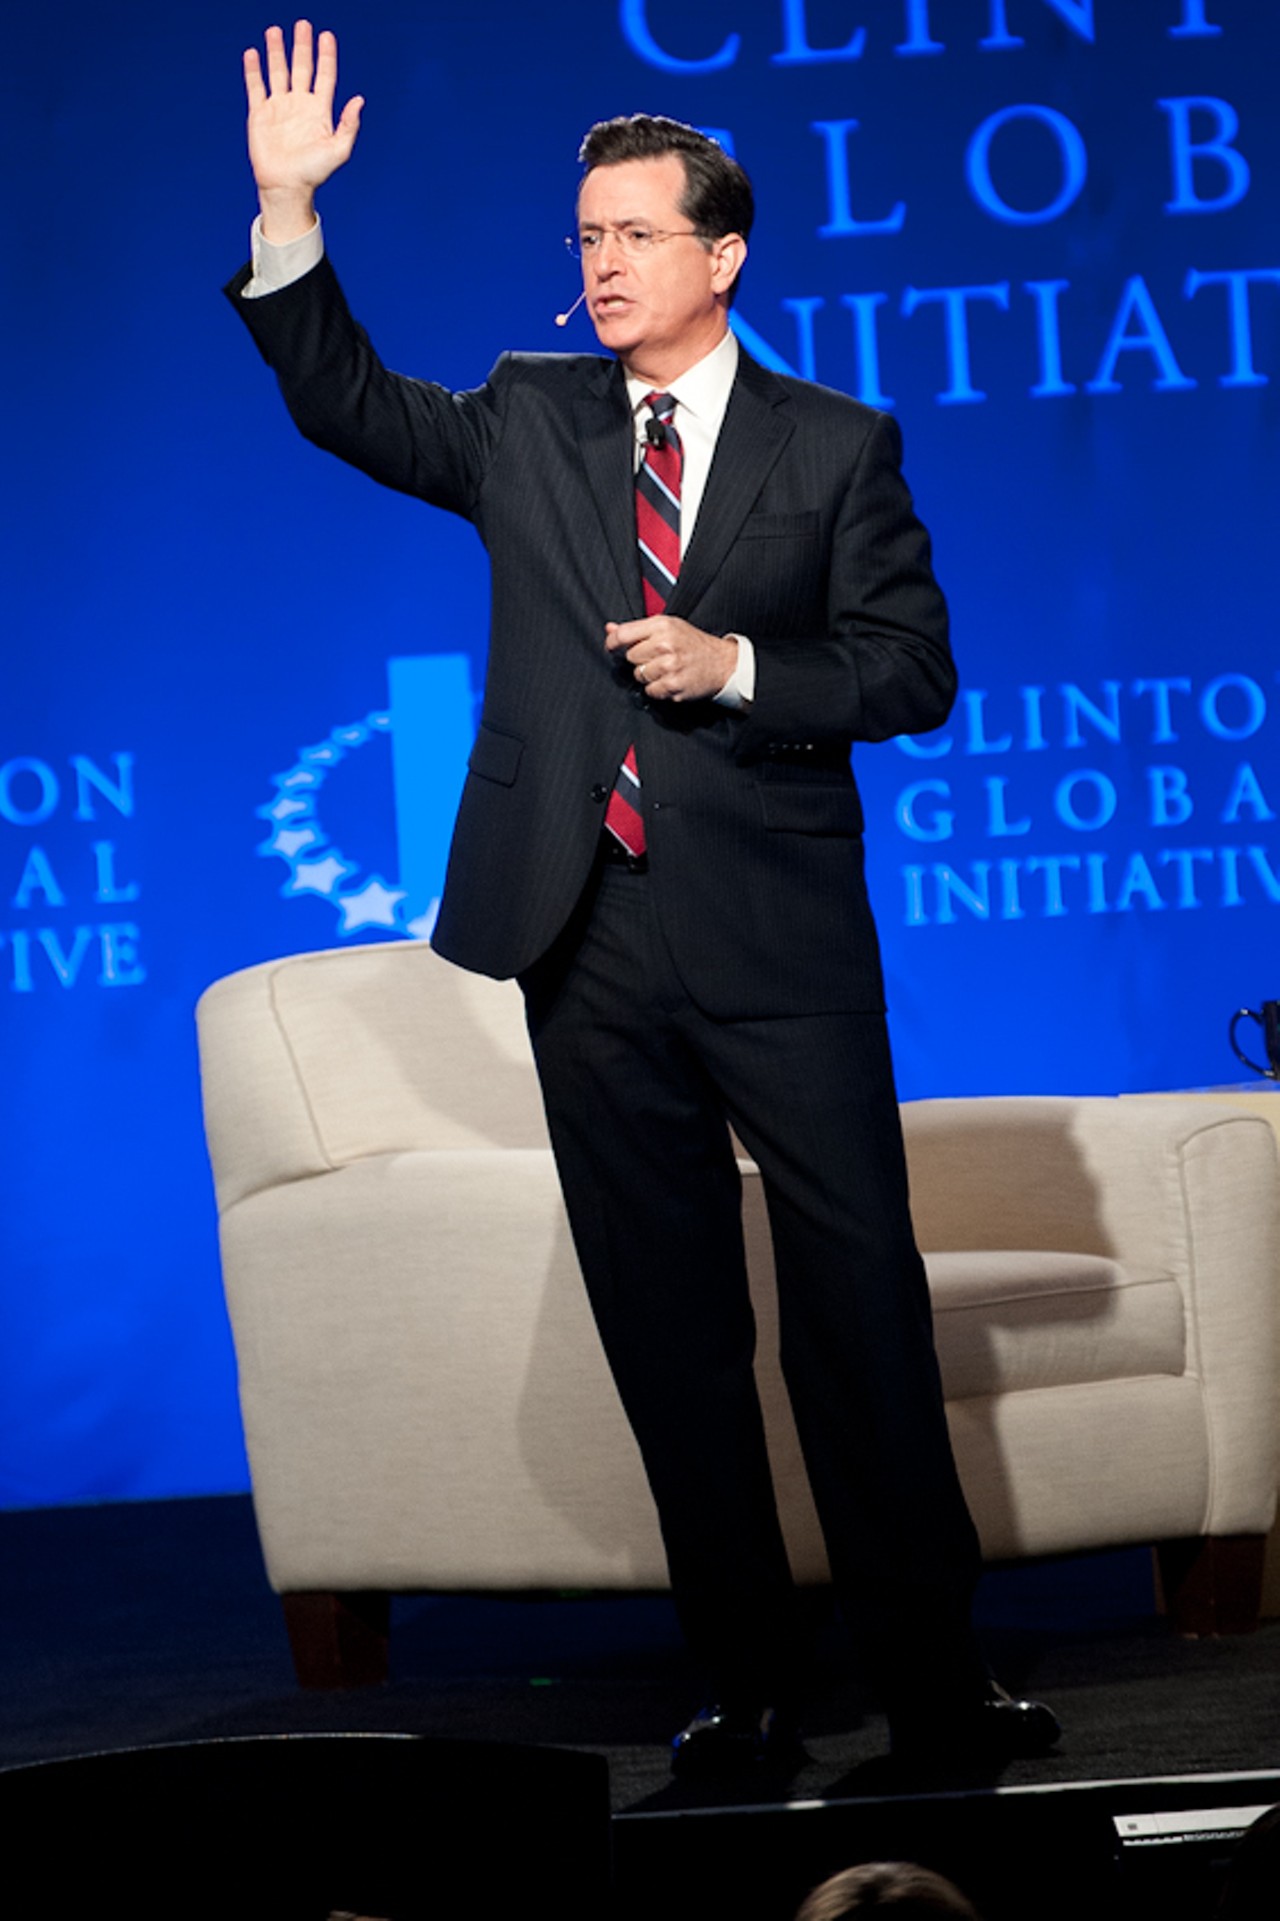 "Show of hands. Who's hasn't hooked up at CGI U?" - Stephen Colbert